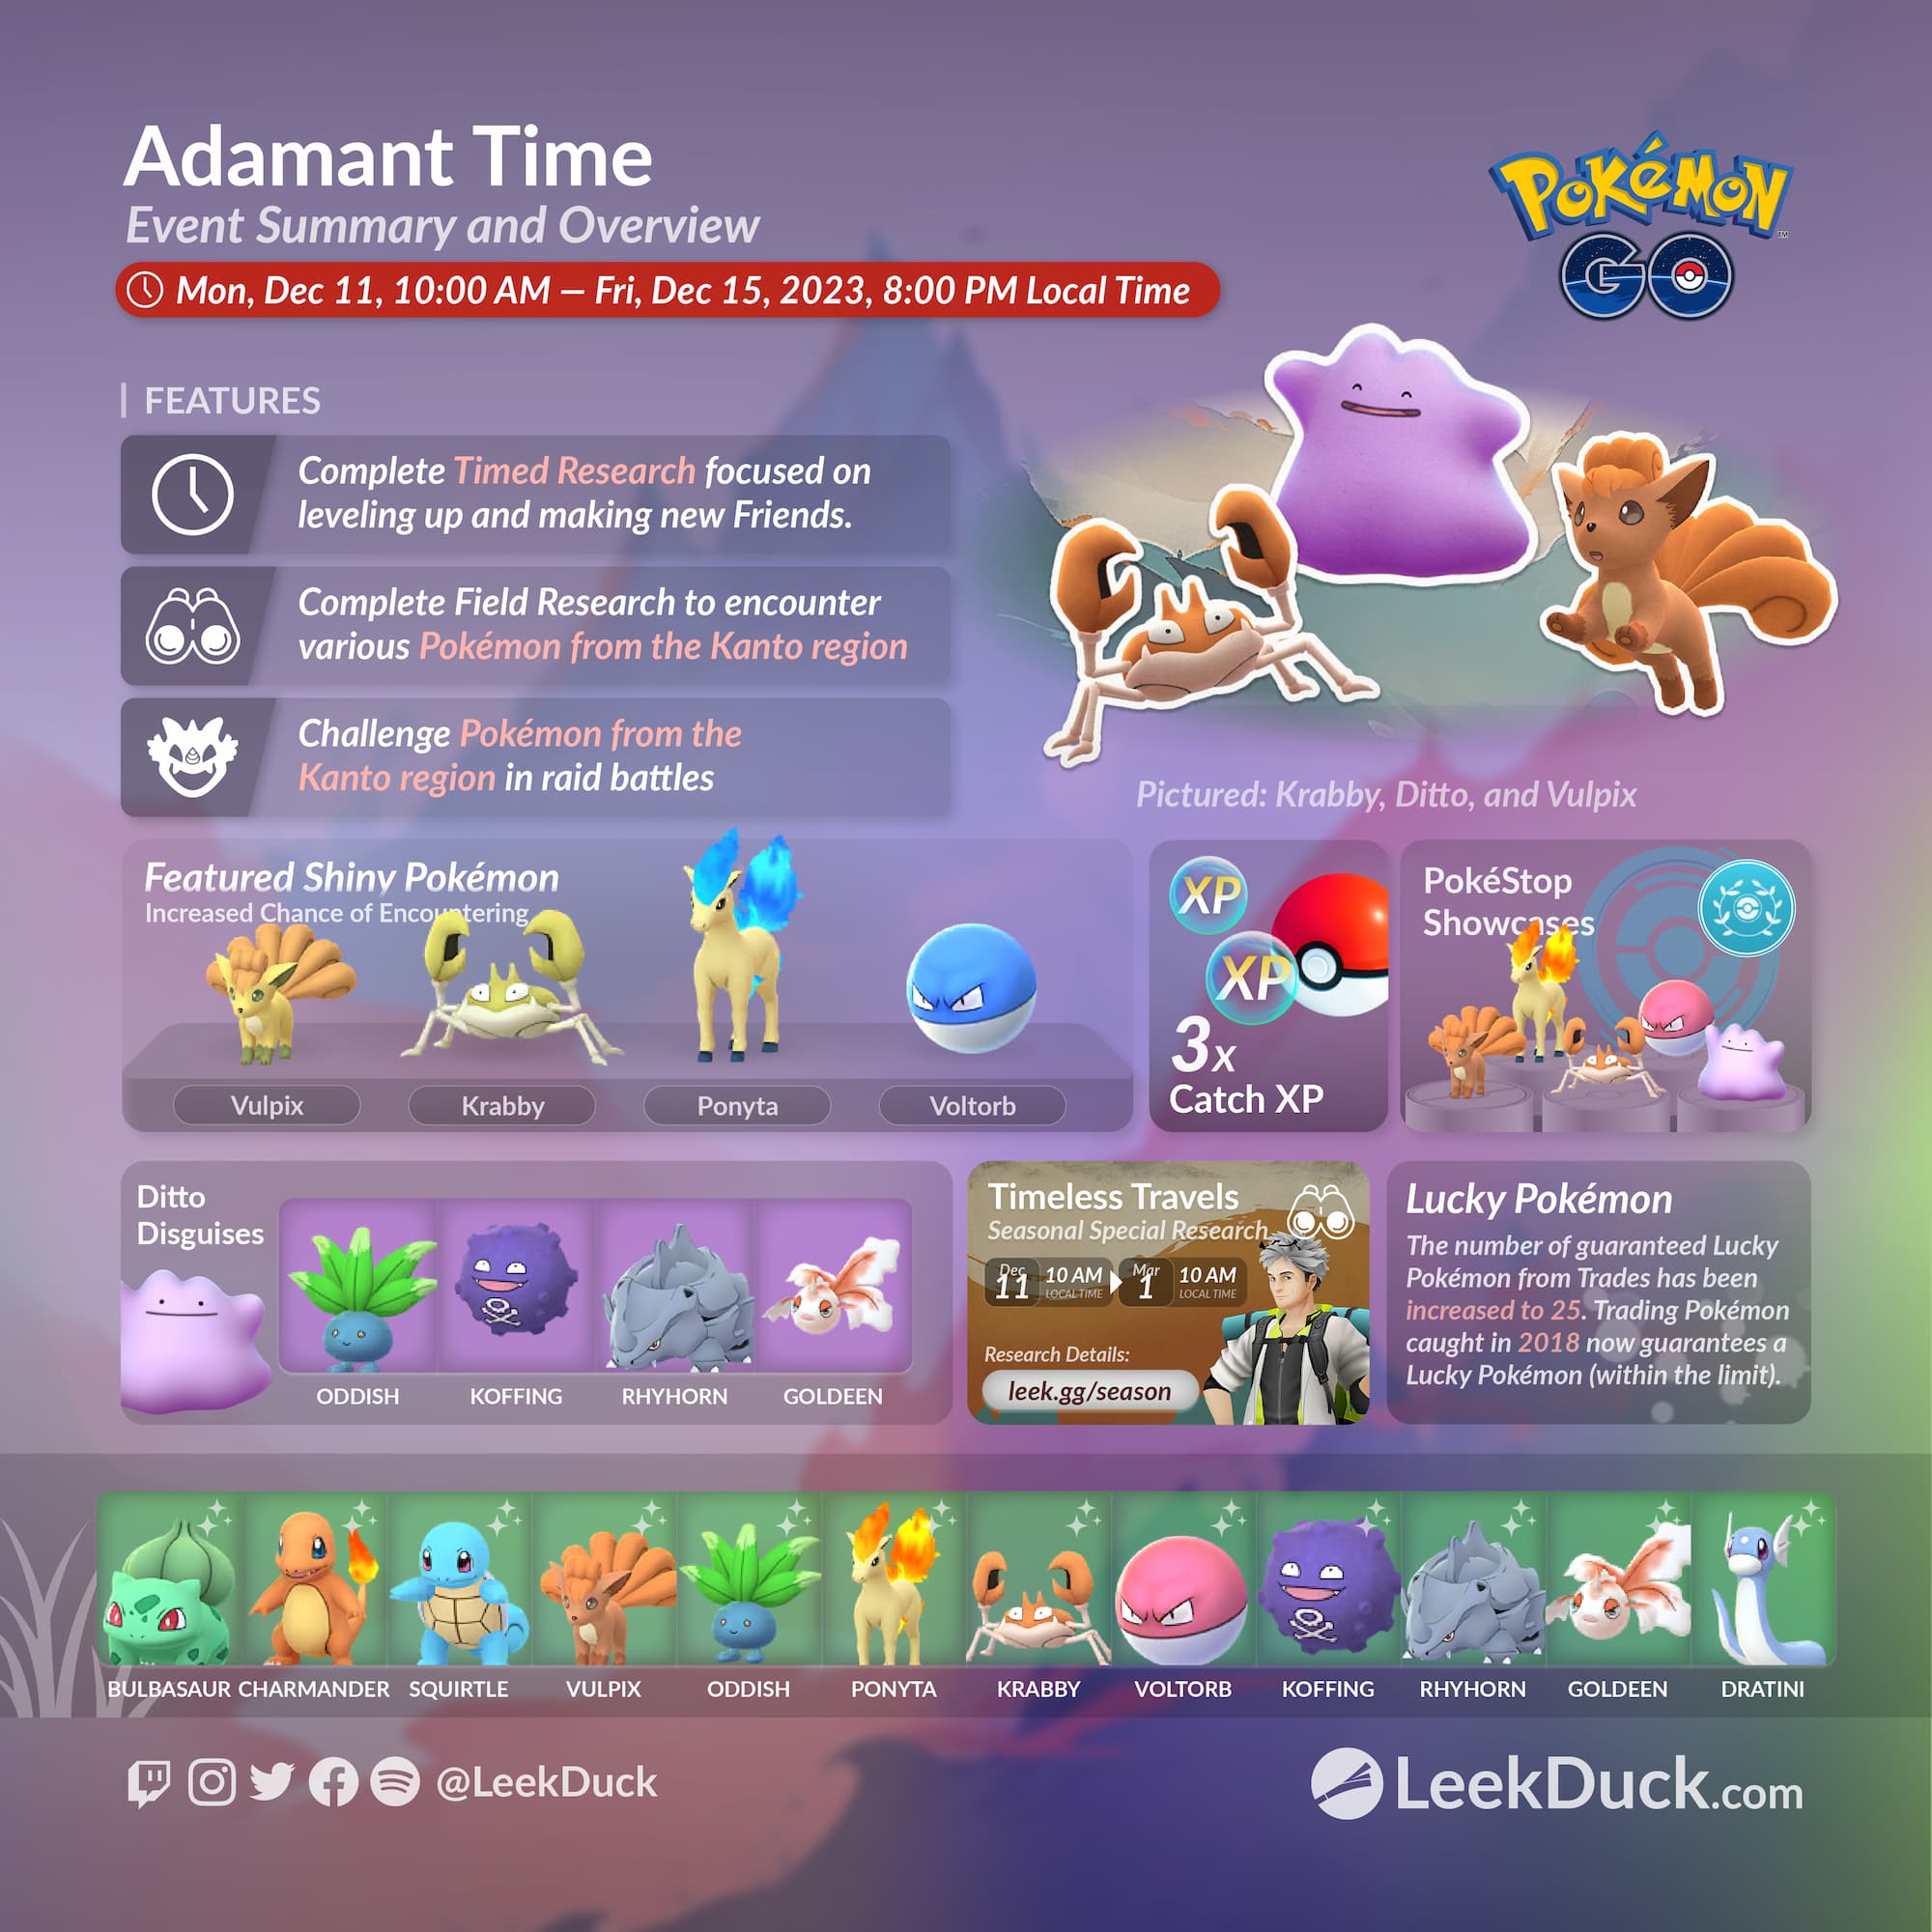 Catch up in time for the Adamant Time event, and party up in a Kanto  comeback! – Pokémon GO